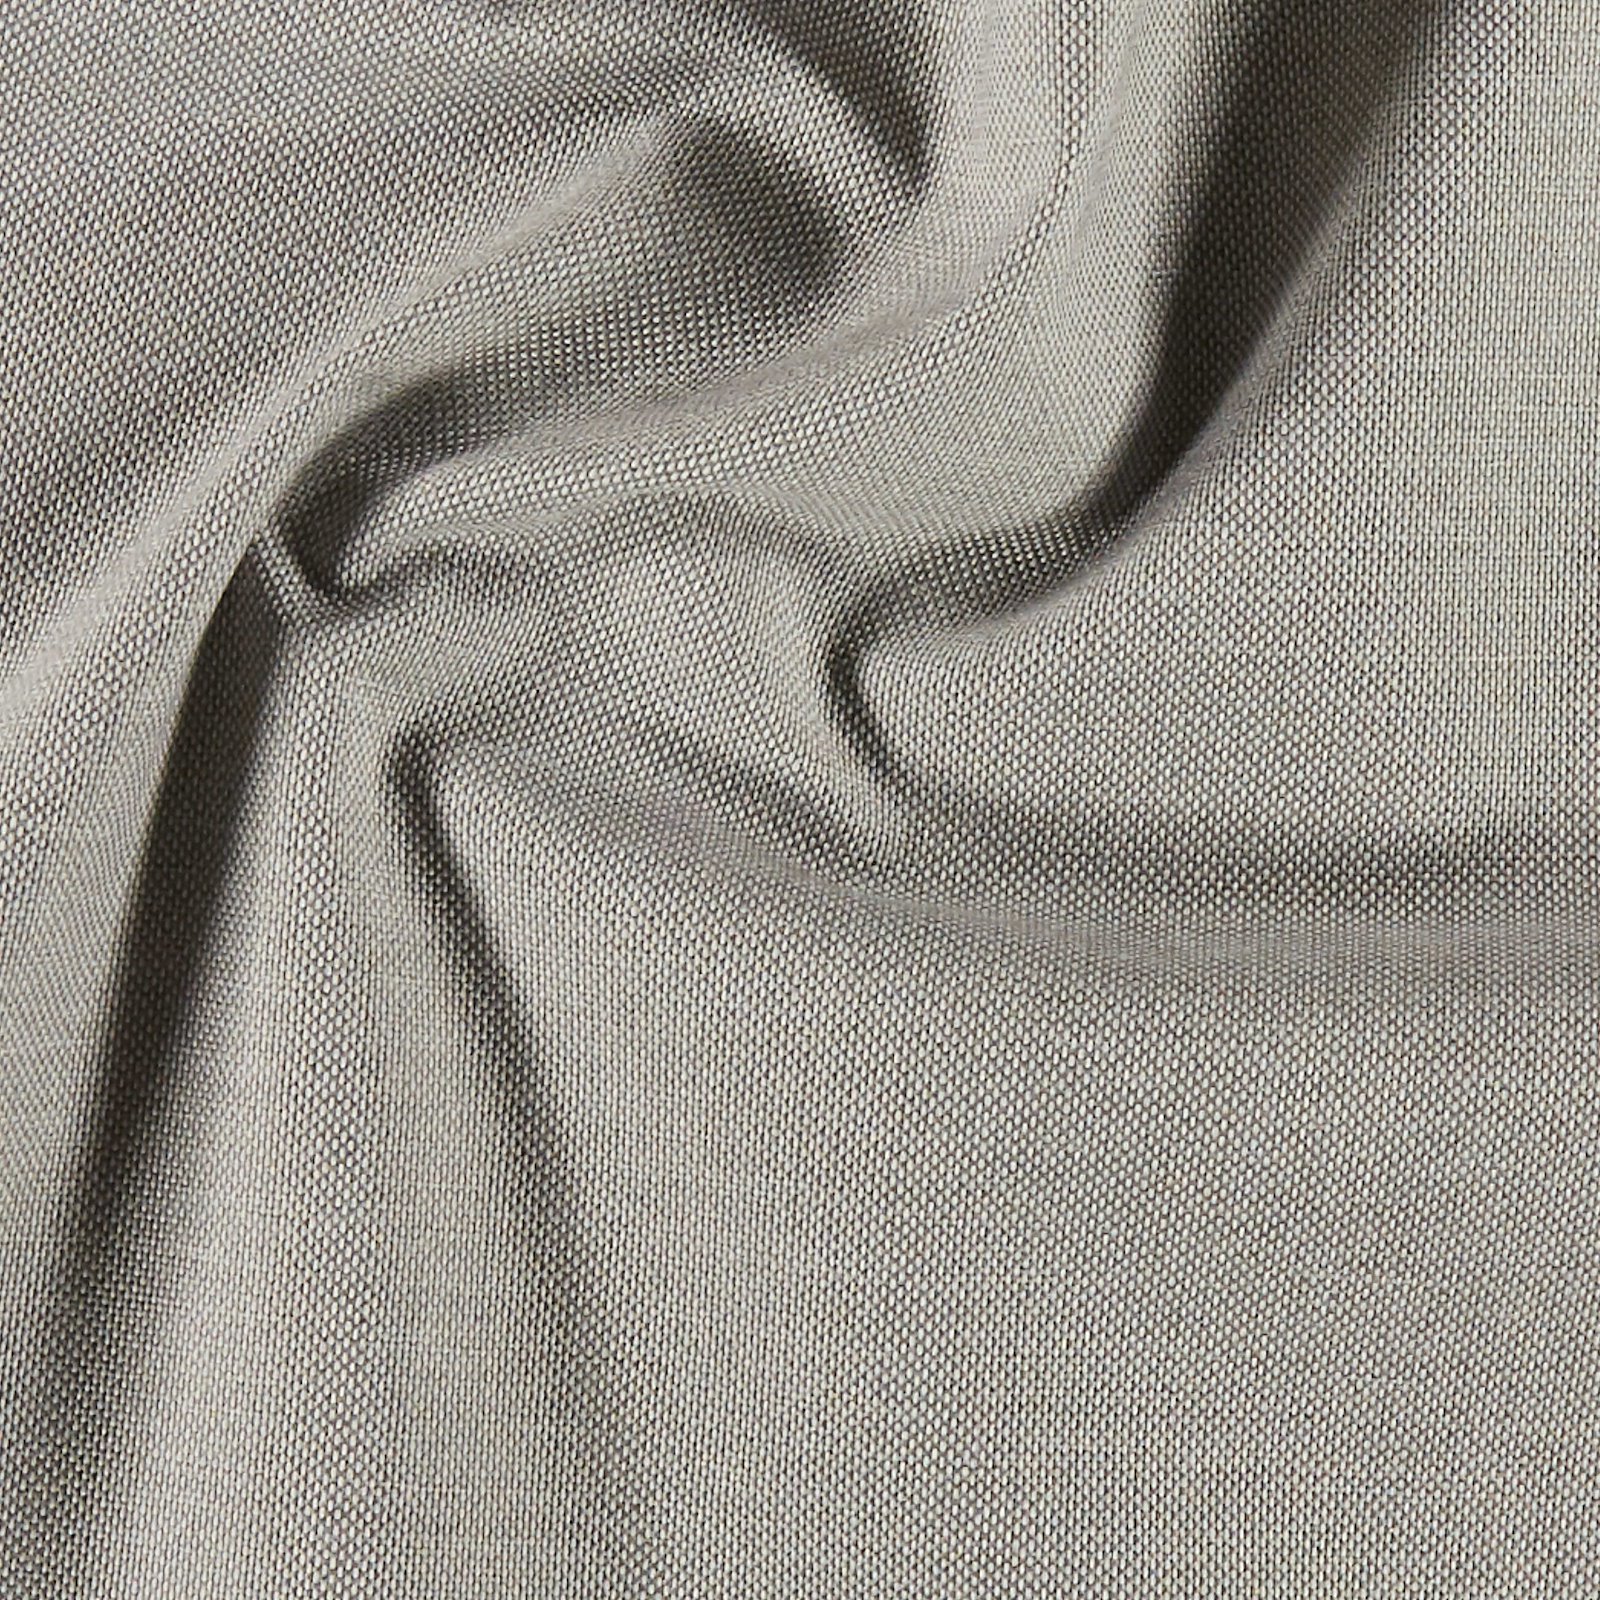 Upholstery fabric light grey 822231_pack